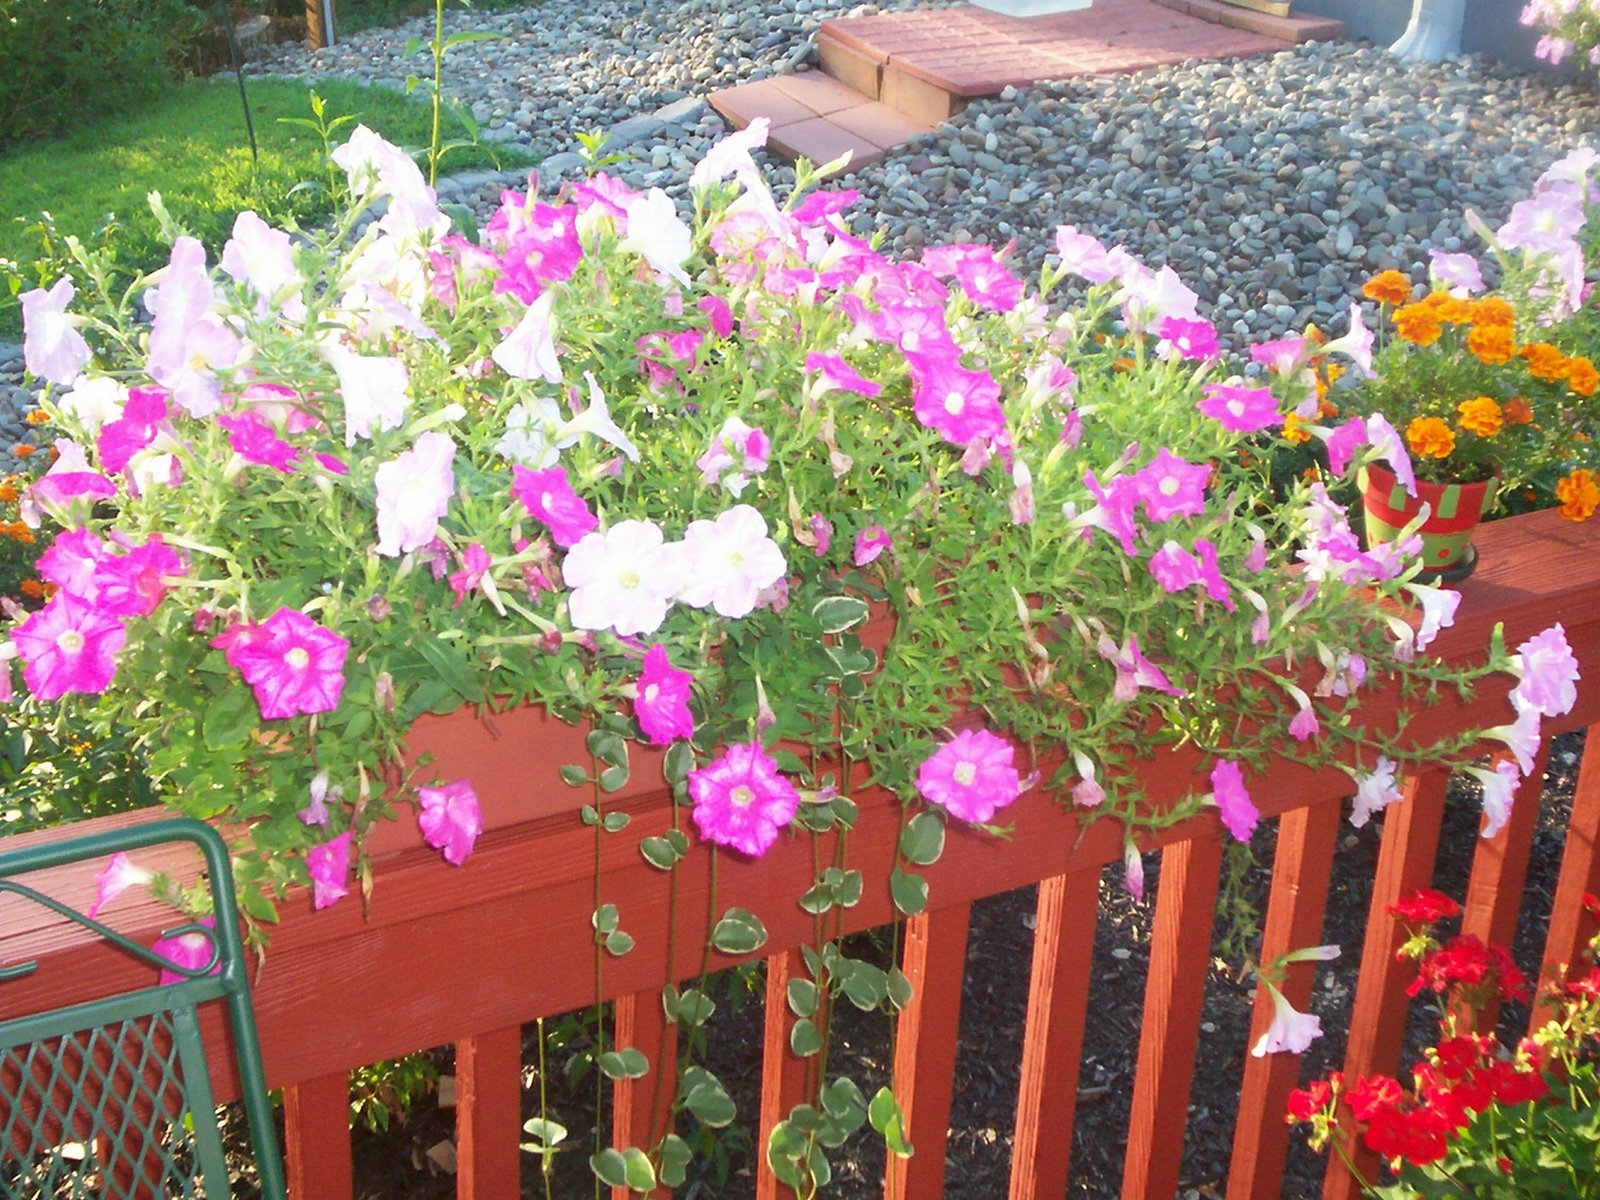 I love flower pots on the deck